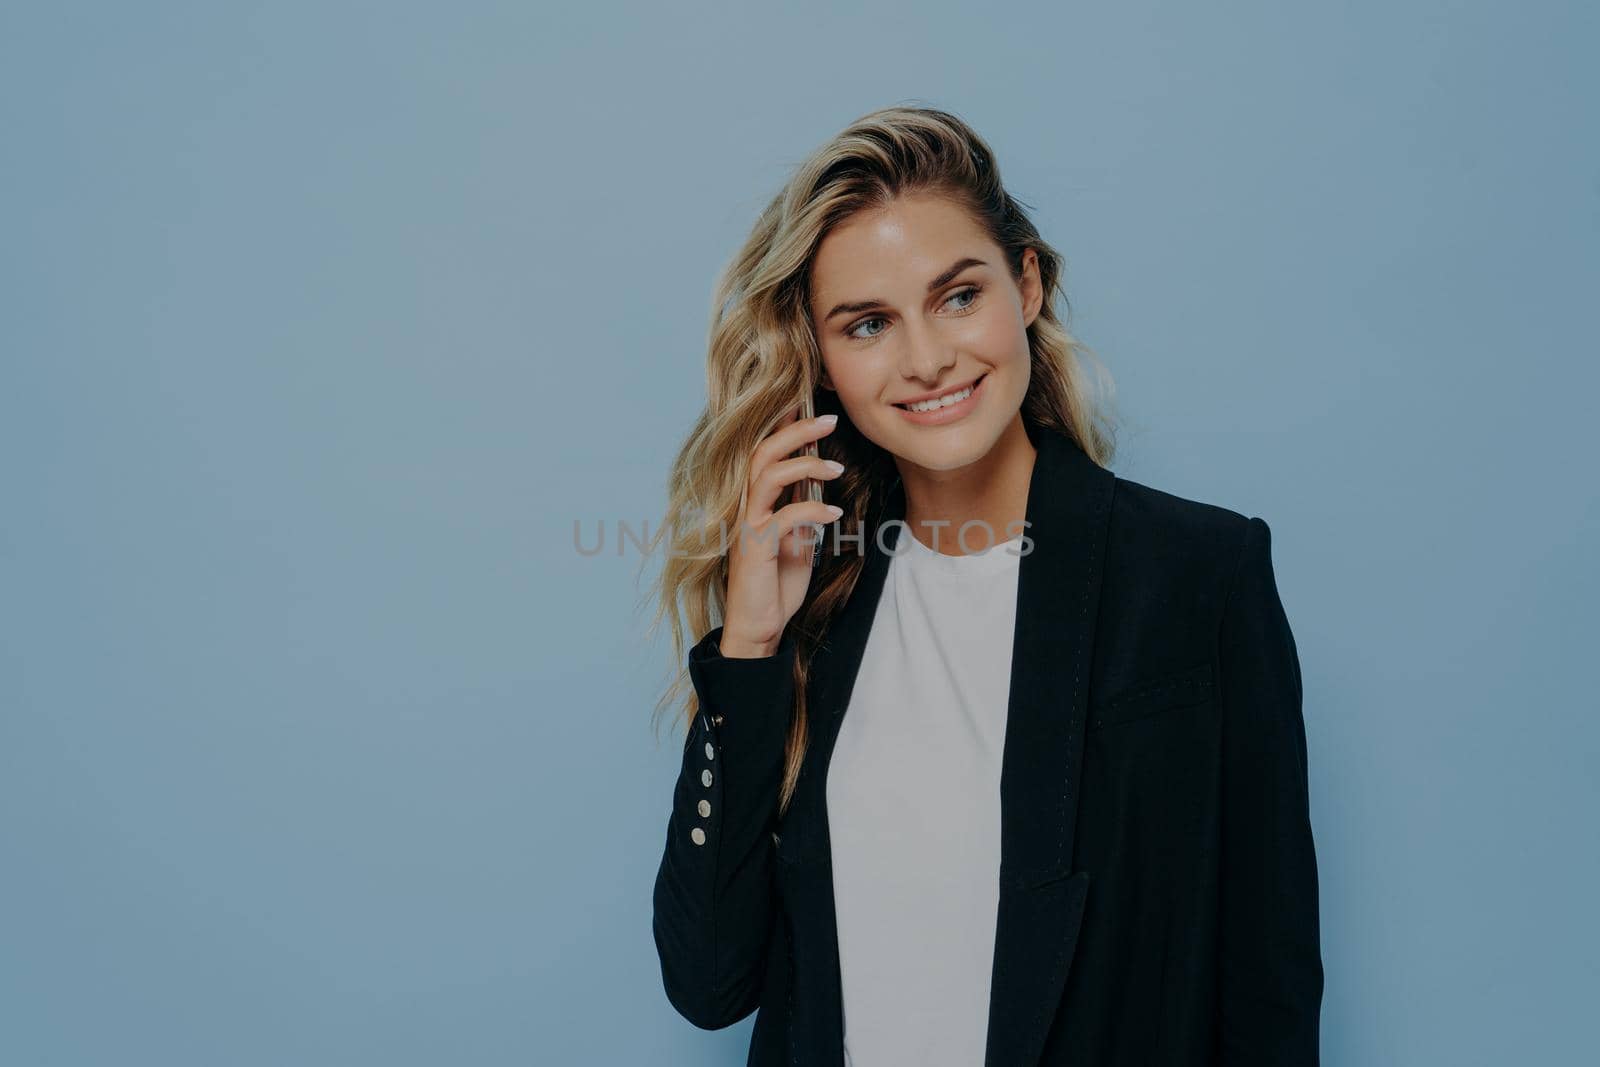 Blonde business woman in black jacket talking on mobile phone with family, happy to hear good news, listening and looking sideways while standing isolated on blue background. Communication concept